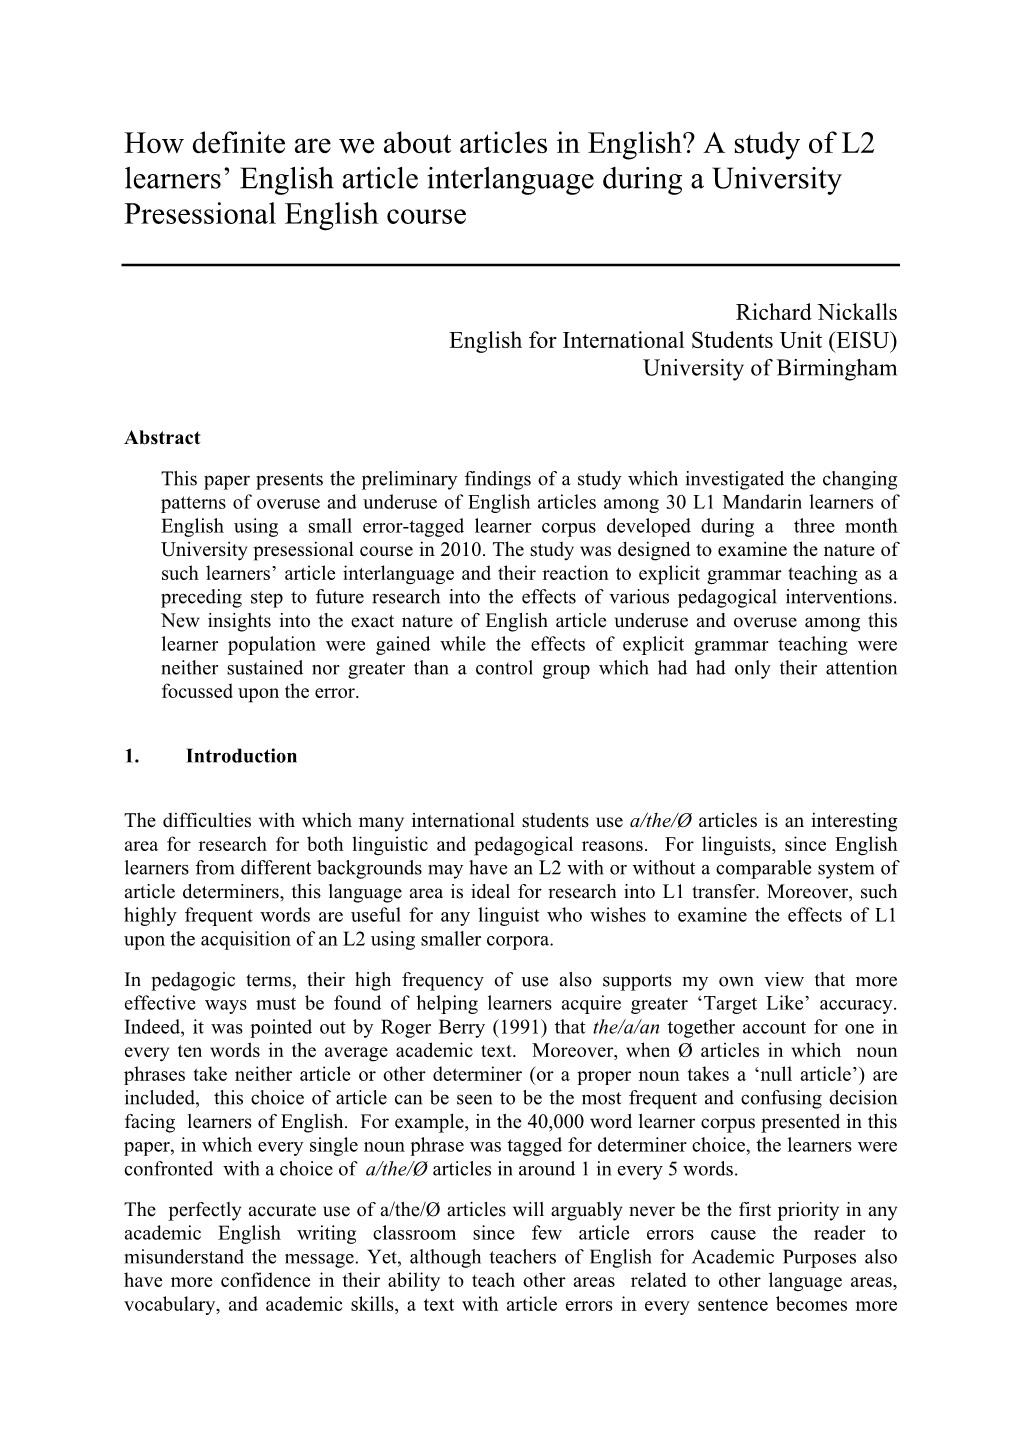 How Definite Are We About Articles in English? a Study of L2 Learners’ English Article Interlanguage During a University Presessional English Course